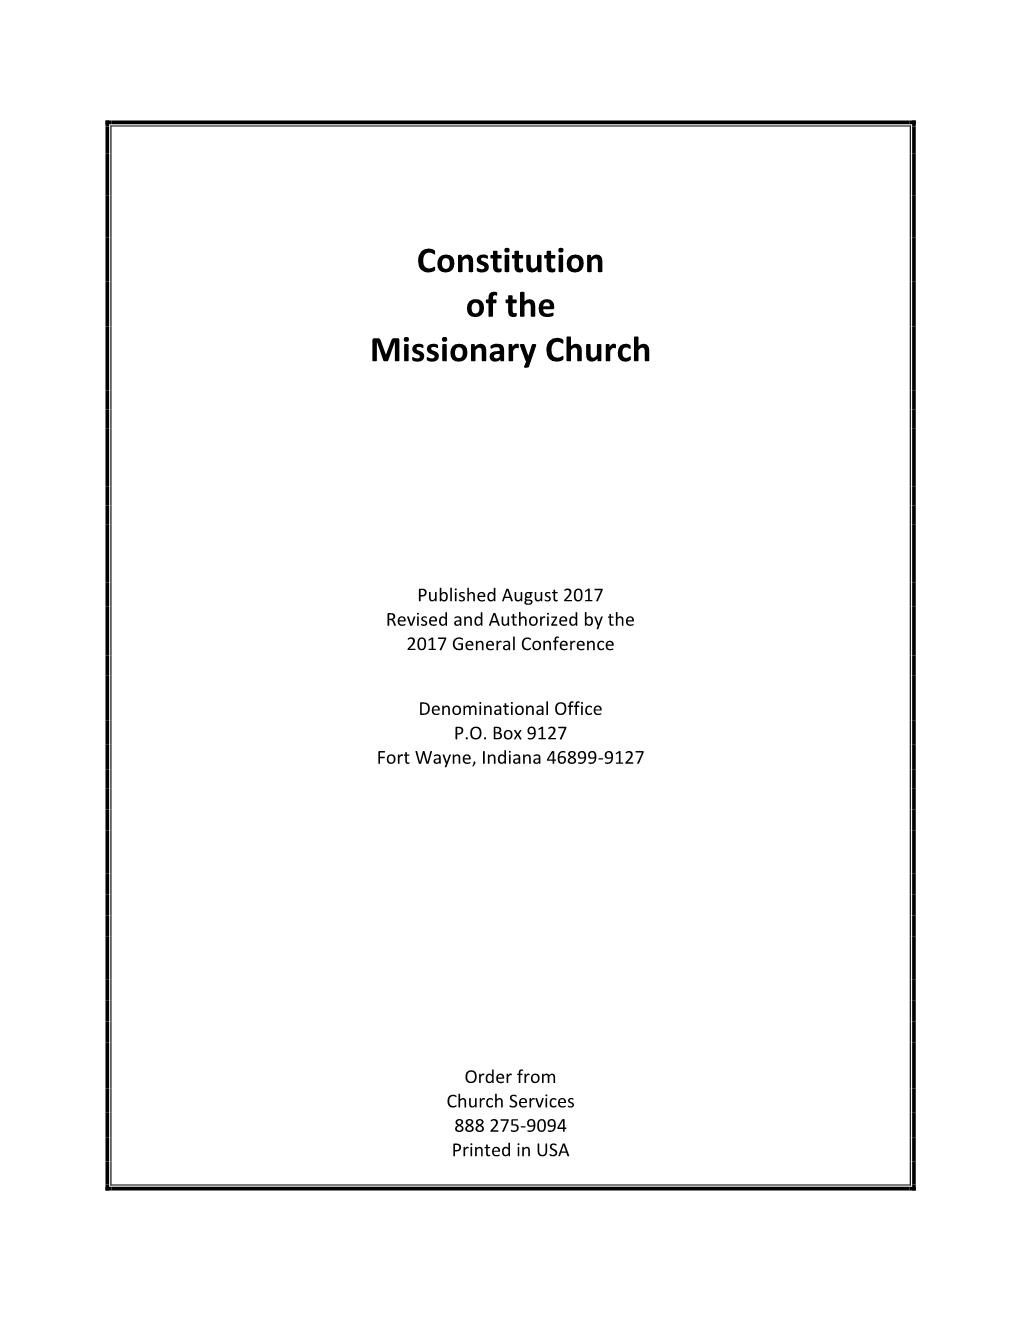 Constitution of the Missionary Church